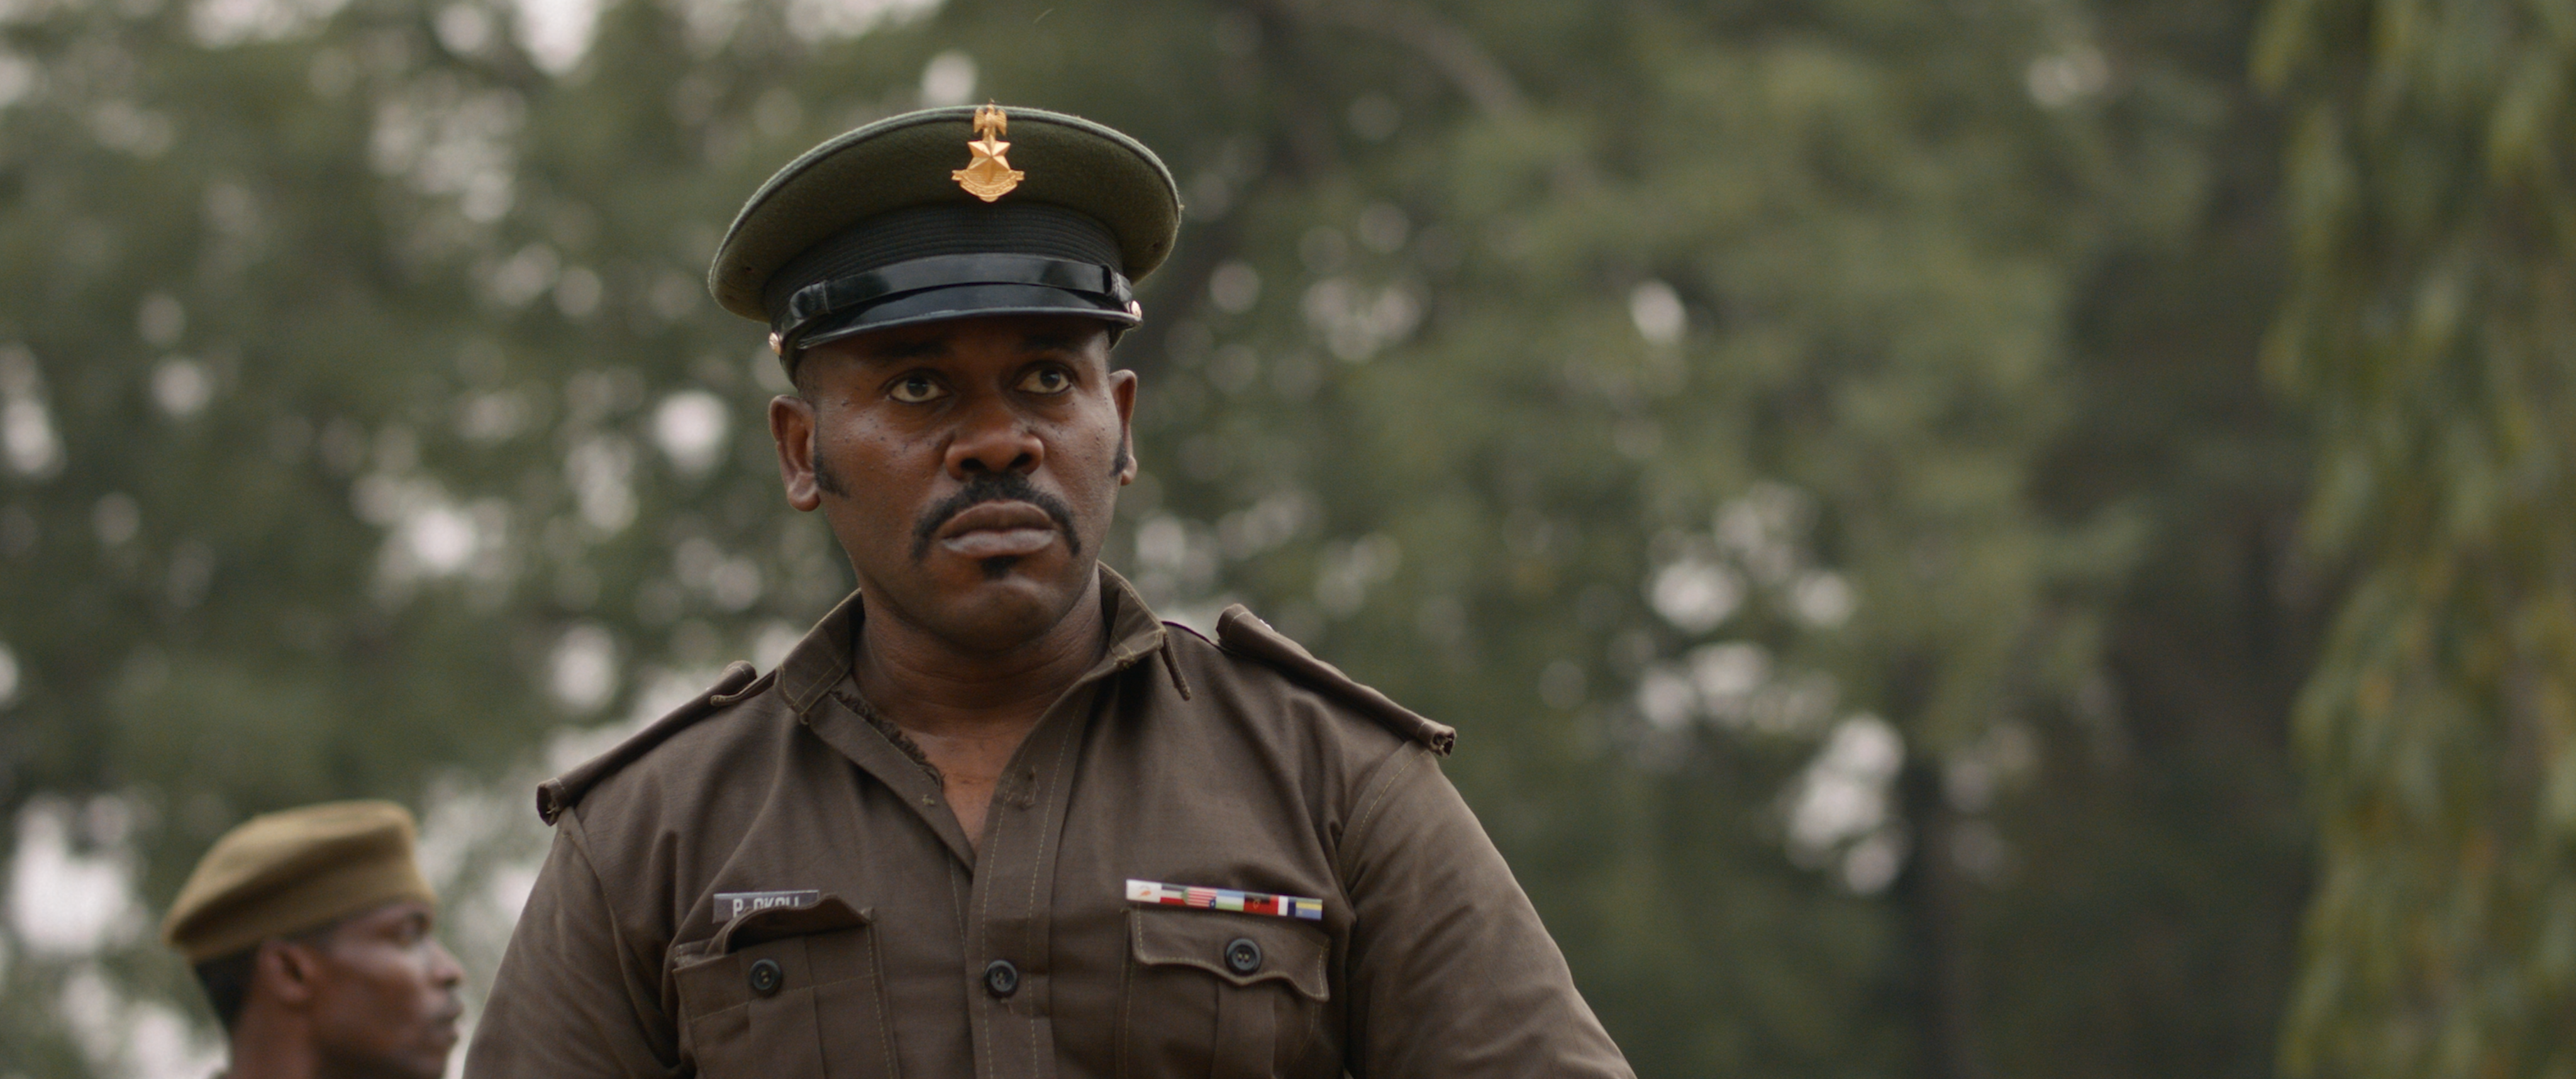 AGF STILL 8 - Taiwo Egunjobi’s Noir Drama, “A Green Fever” To Screen in Competition at AFRIFF 2023